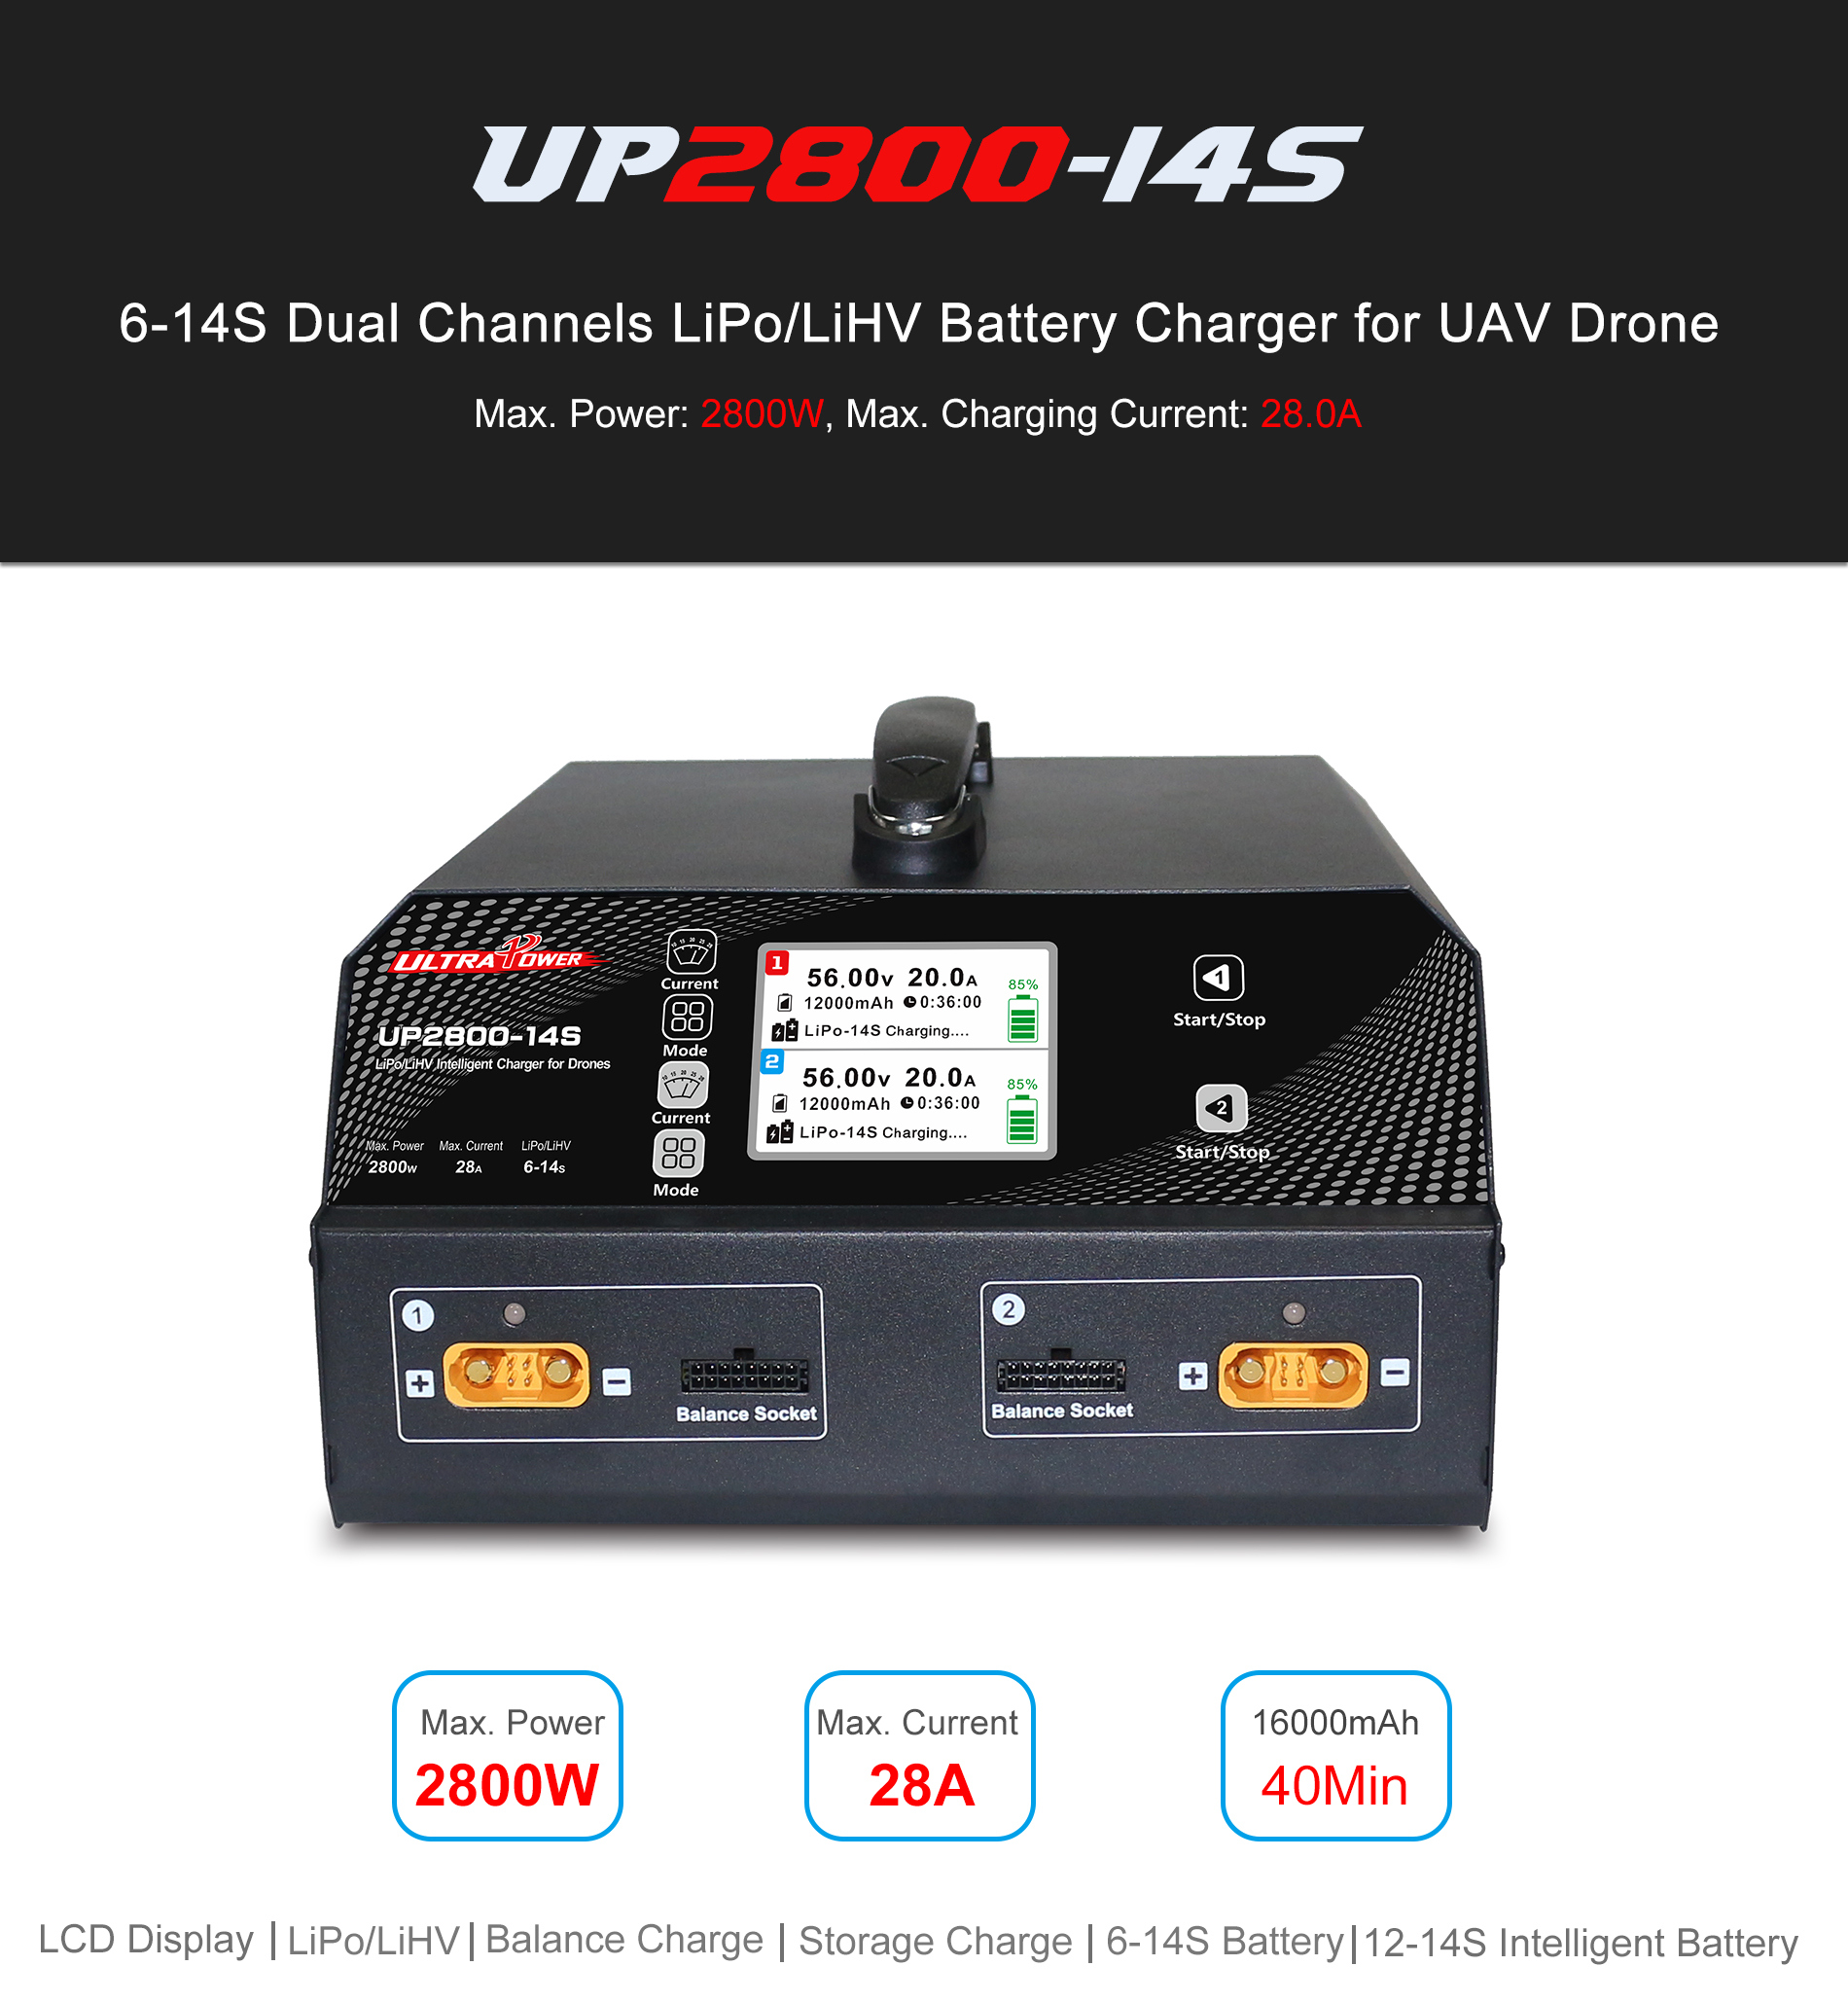 UP2800-14S 2X1400W 28A 6-14S LiPo/LiHV Battery UAV Drone Charger